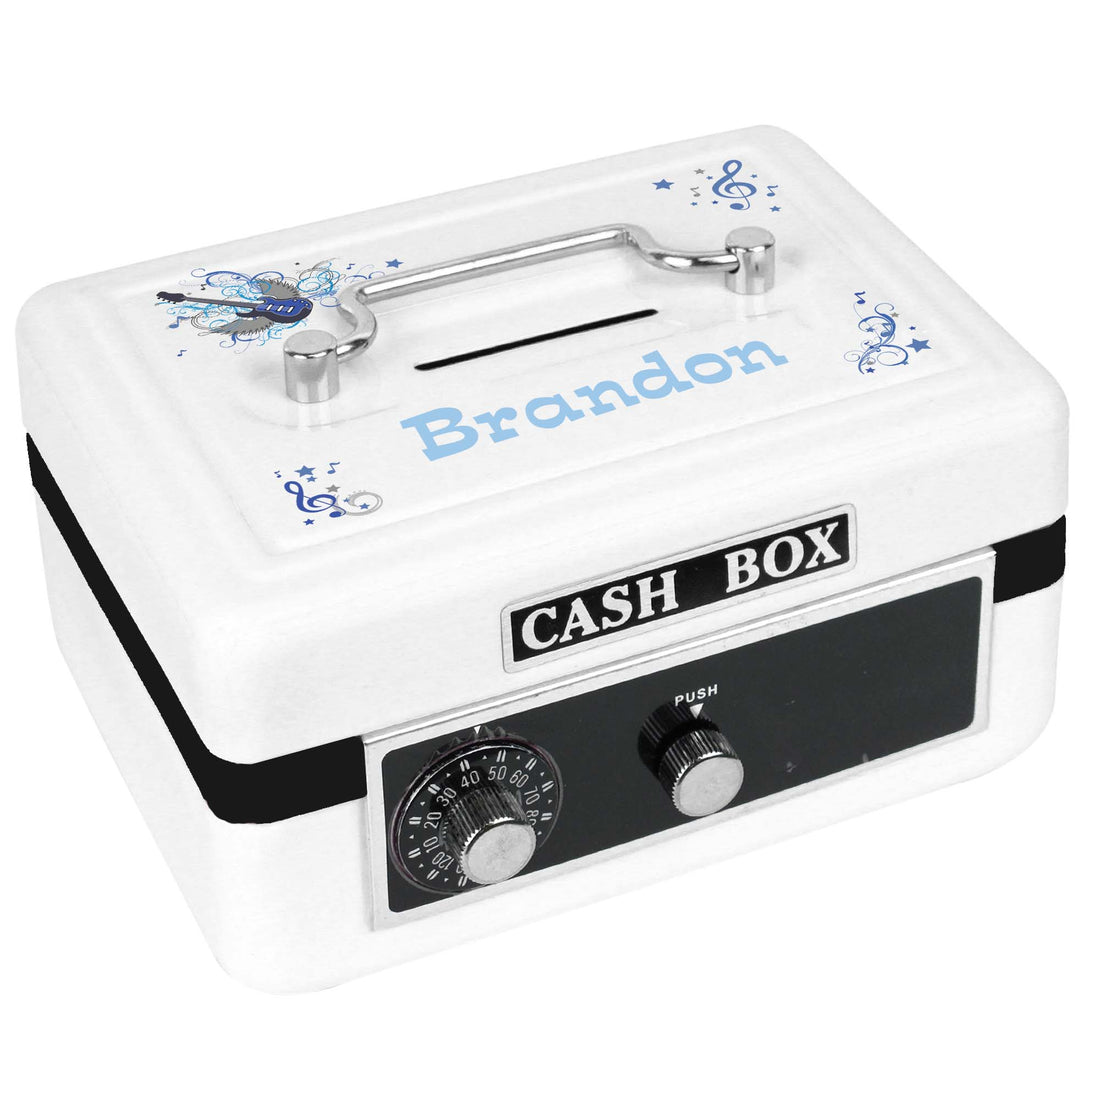 Personalized White Cash Box with Blue Rock Star design